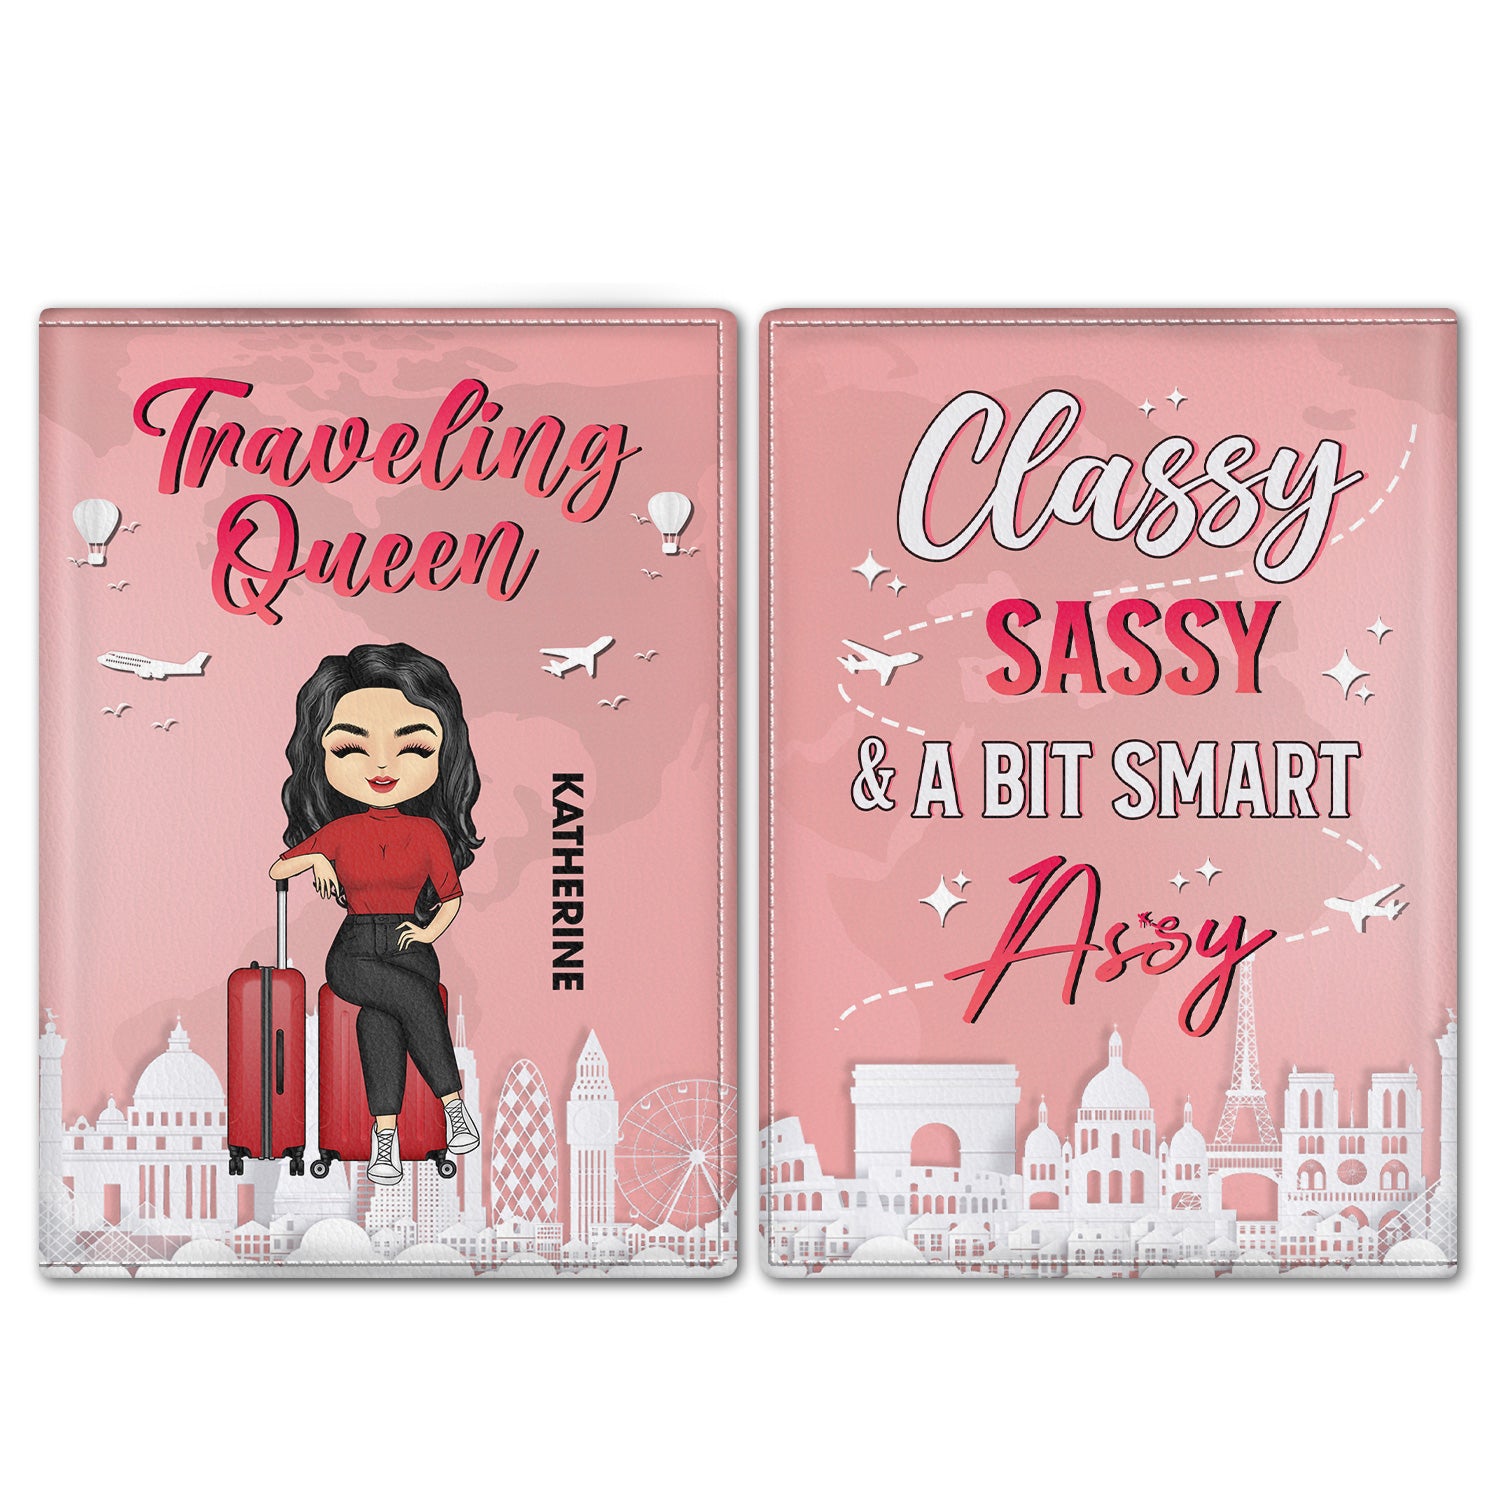 Traveling Queen Classy Sassy - Gift For Yourself, Gift For Travel Lovers - Personalized Custom Passport Cover, Passport Holder